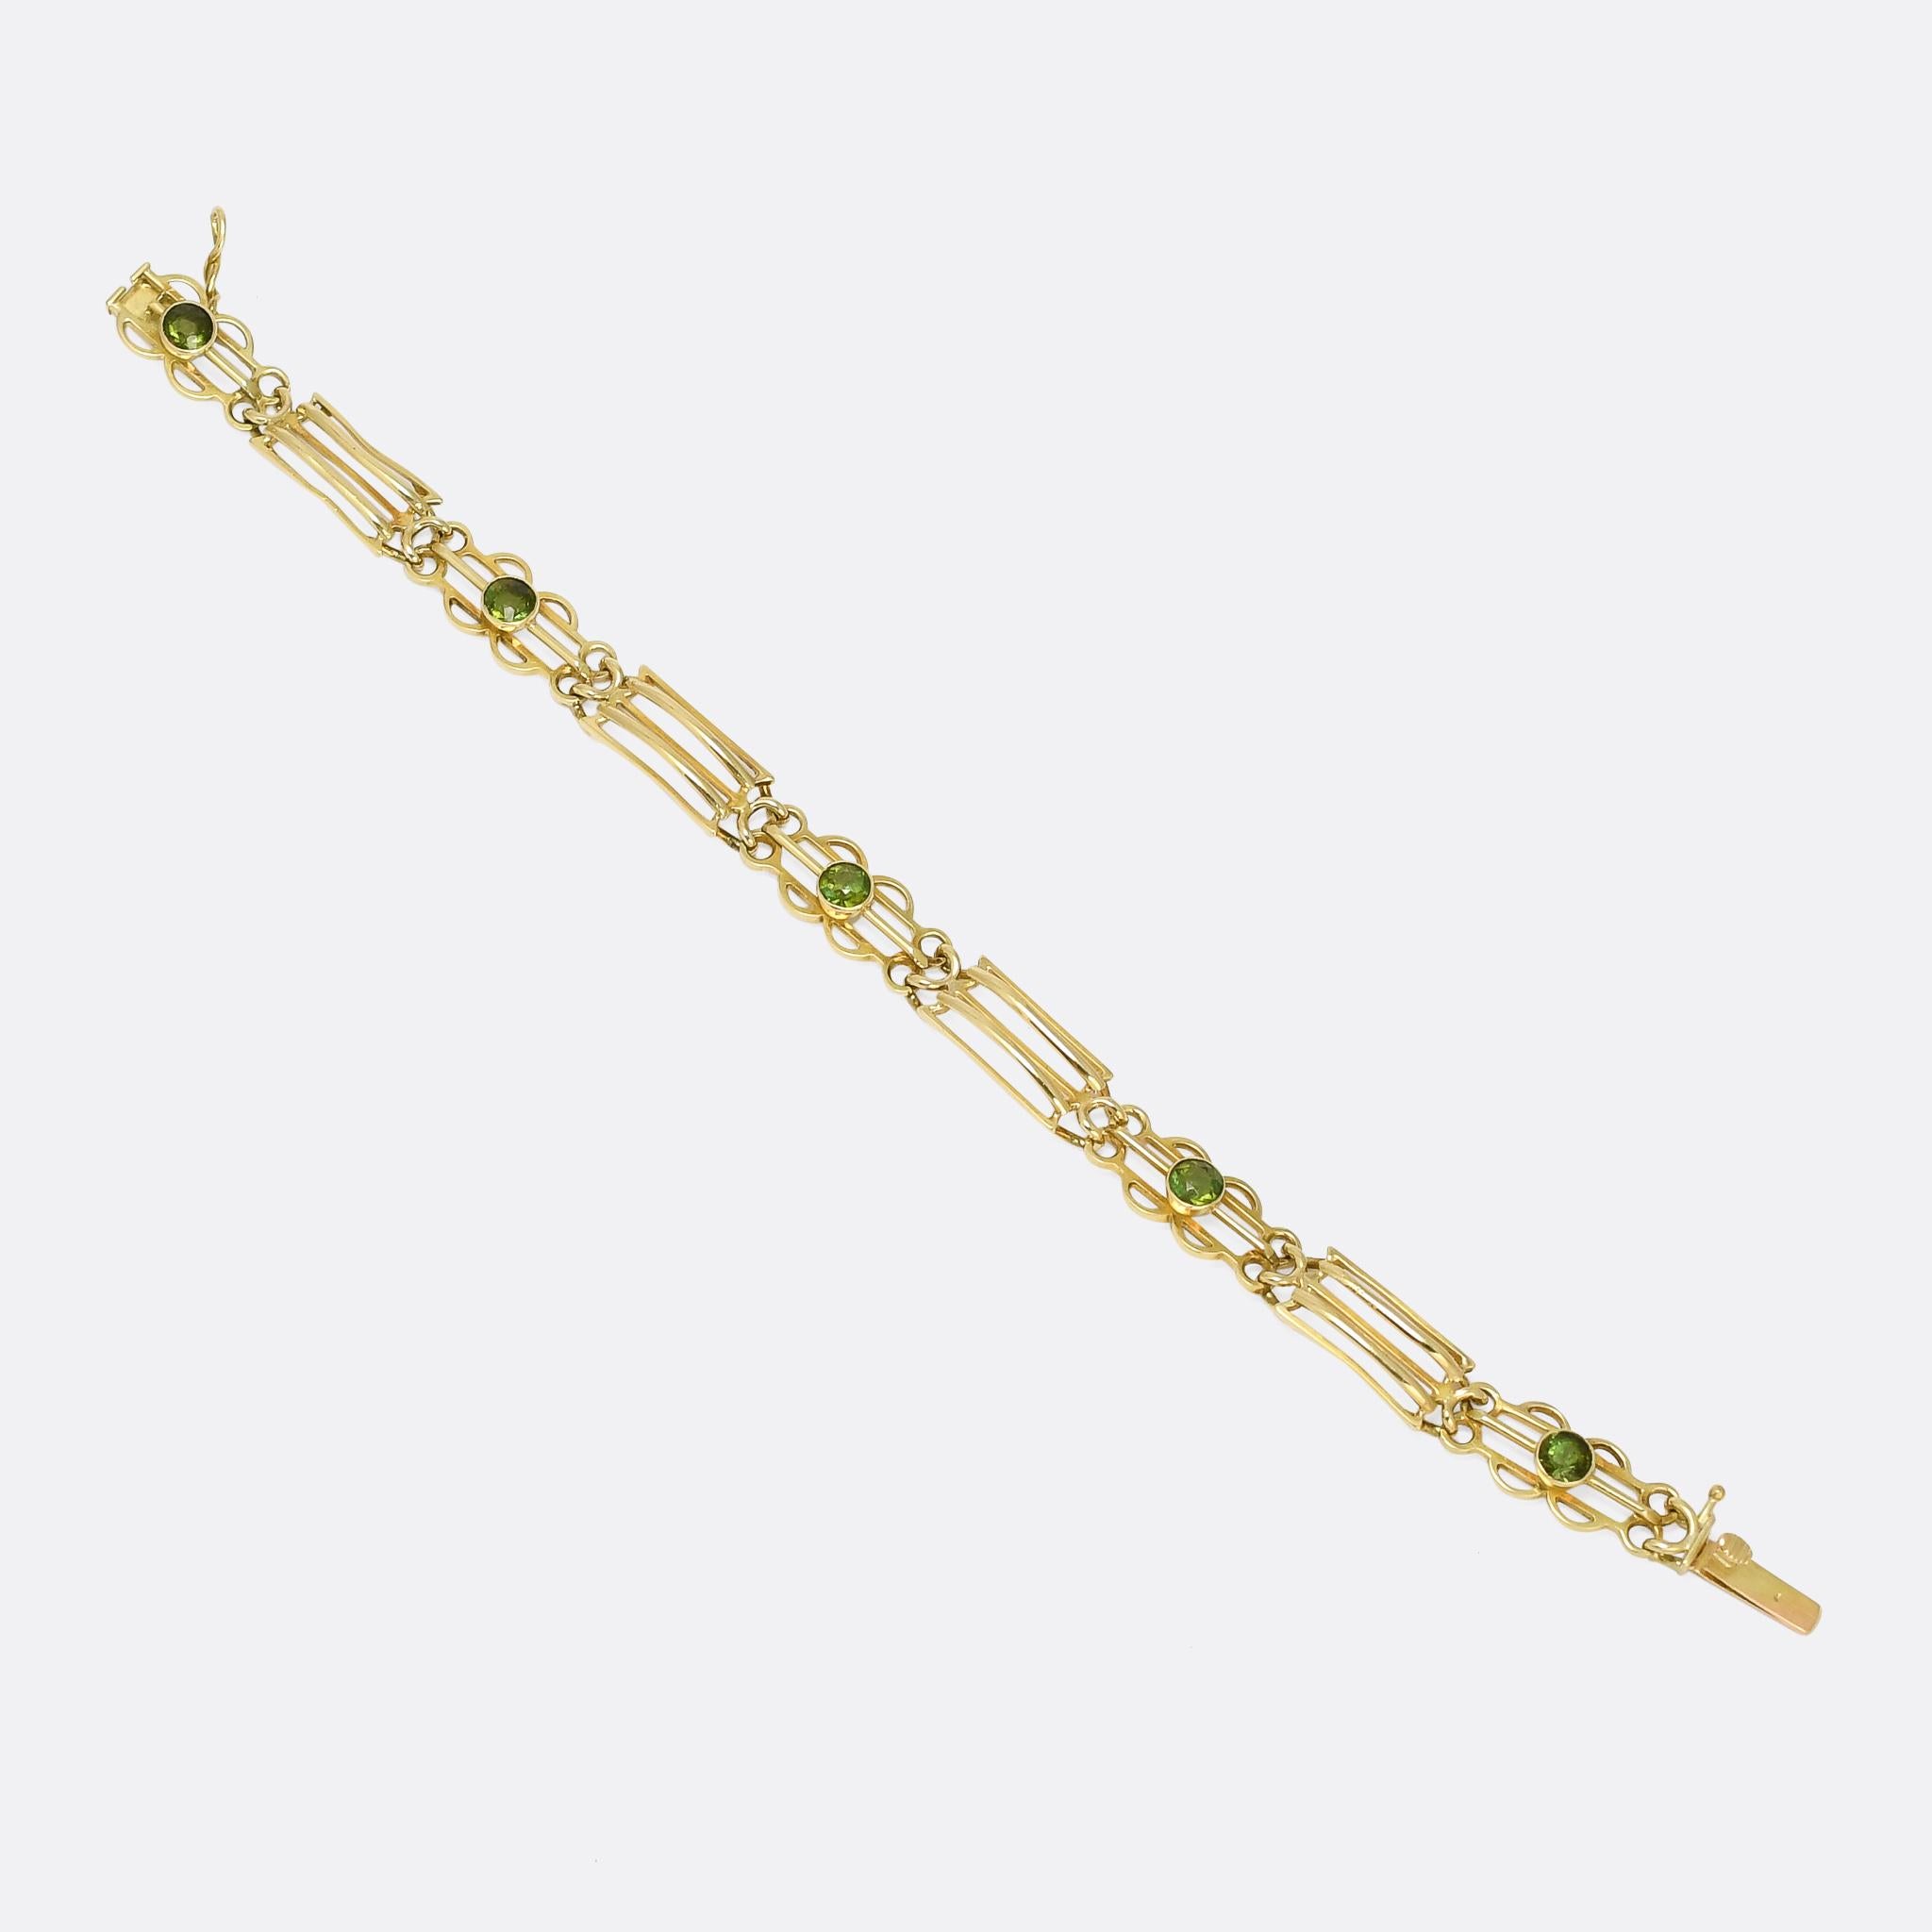 A superb antique gate-link bracelet set with five half carat peridot gemstones. It's beautifully crafted, with alternating gate and gem-set links, and crafted in 15 karat gold throughout. Dating from the early 20th century, circa 1910.

STONES
Five